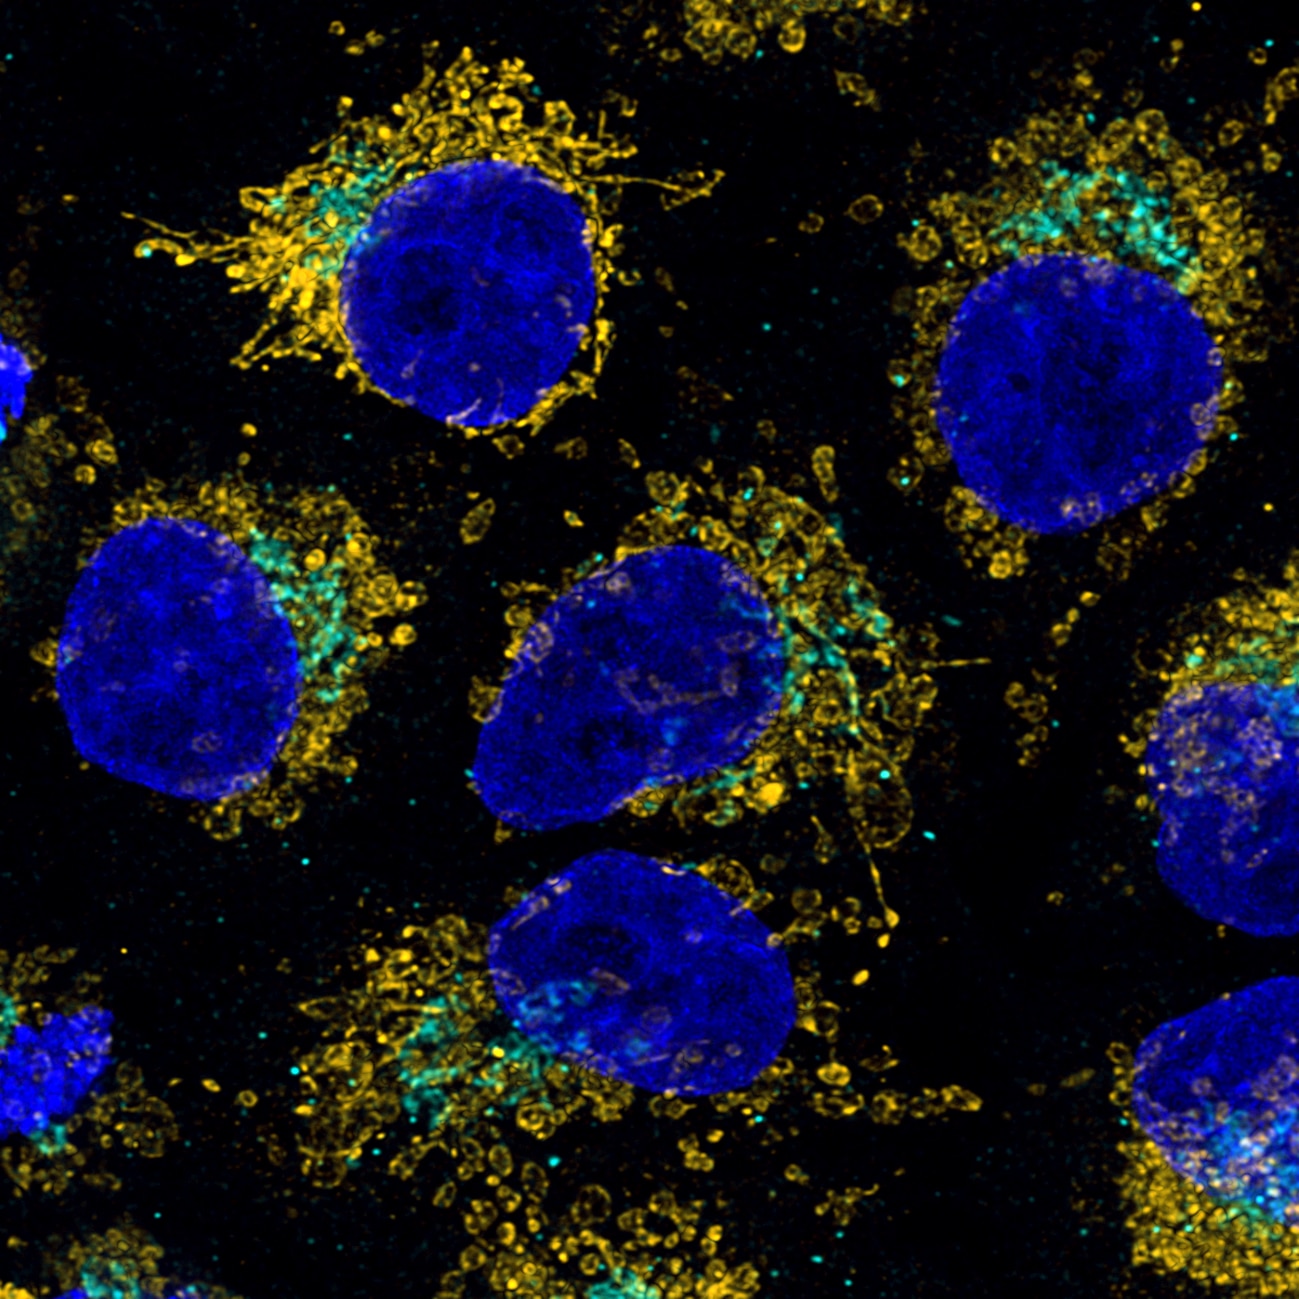 Immunofluorescence of HeLa: PFA-fixed HeLa cells were stained with anti-HSP60 antibody (66041-1-Ig) labeled with FlexAble CoraLite Plus 550 Kit (KFA022, yellow), anti-GORASP2 antibody (66627-1-Ig) labeled with FlexAble CoraLite Plus 650 Kit (KFA023, cyan) and DAPI (blue). Confocal images were acquired with a 100x oil objective and post-processed. Images were recorded at the Core Facility Bioimaging at the Biomedical Center, LMU Munich.